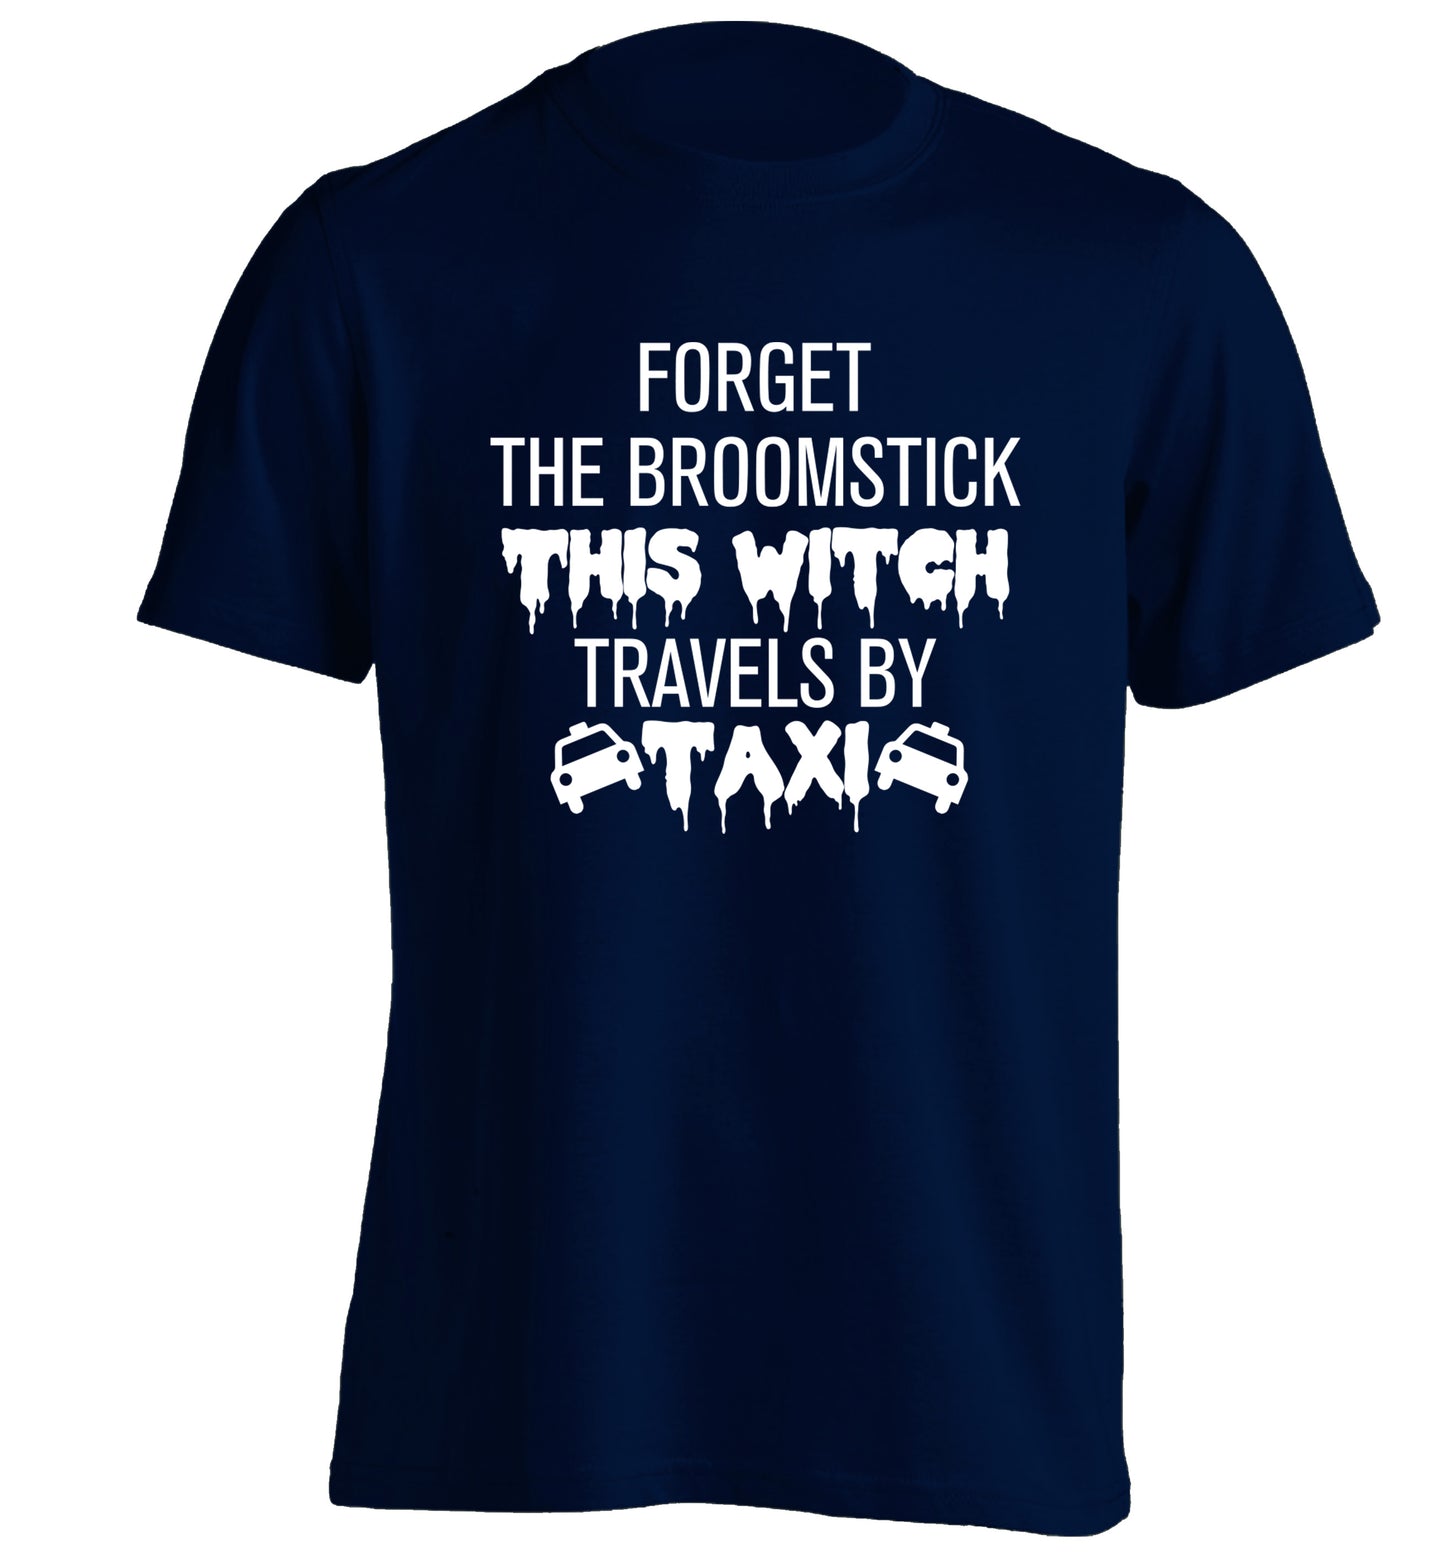 Forget the broomstick this witch travels by taxi adults unisexnavy Tshirt 2XL